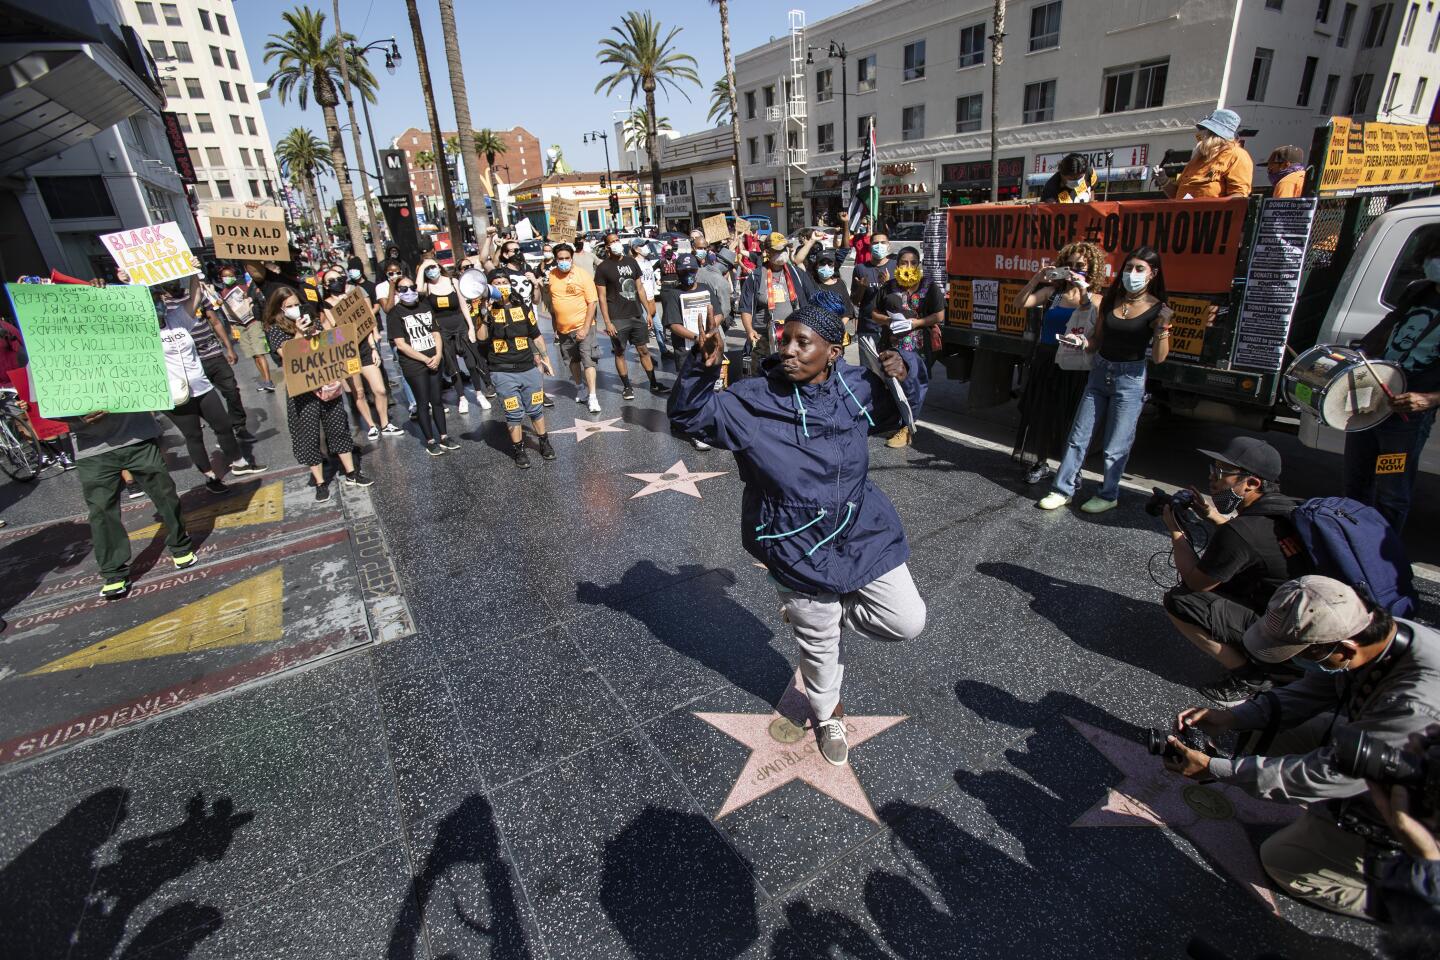 A protester dances on top of Donald Trump's star on the Hollywood Walk of Fame during a demonstration by members of Refuse Fascism